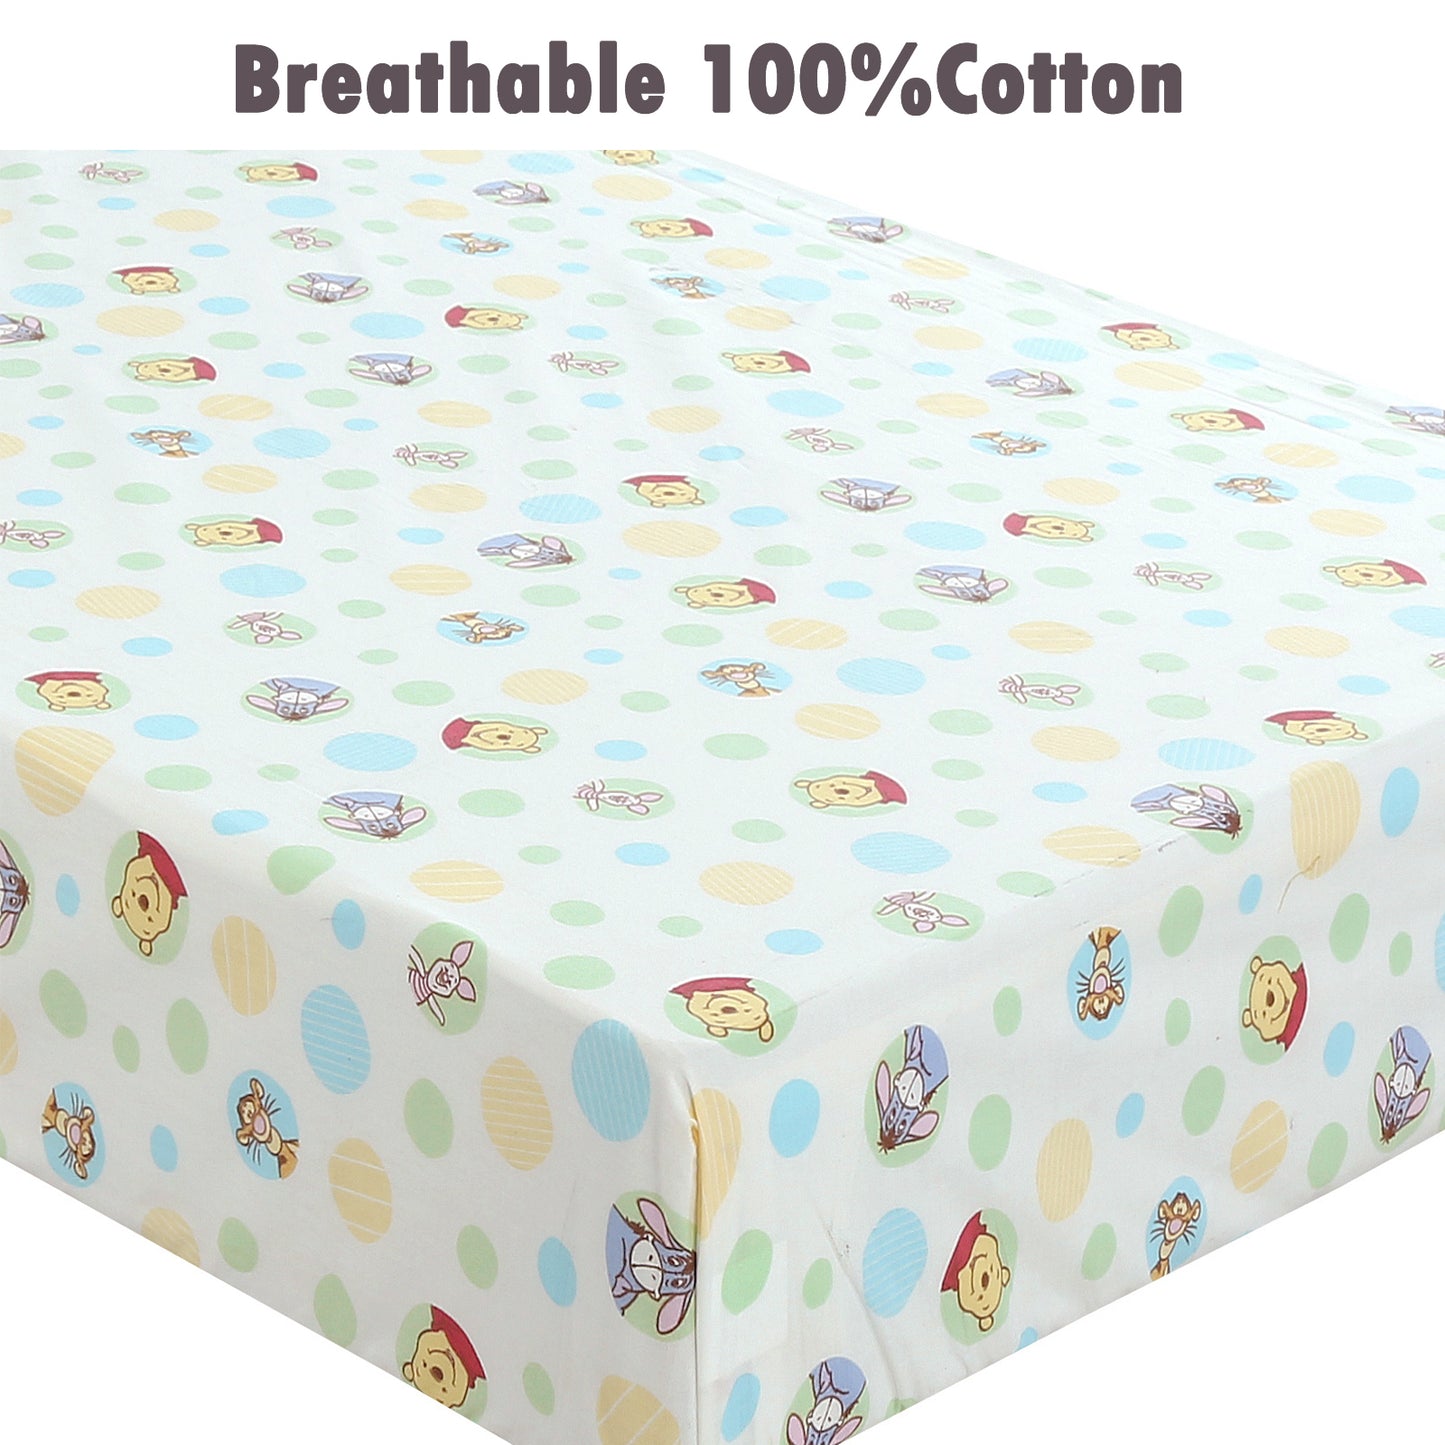 3 Piece Crib/Toddler Cotton Fitted Sheets Colorful Blue Yellow Green Polka Dot Farm Animals, Pooh & Friends